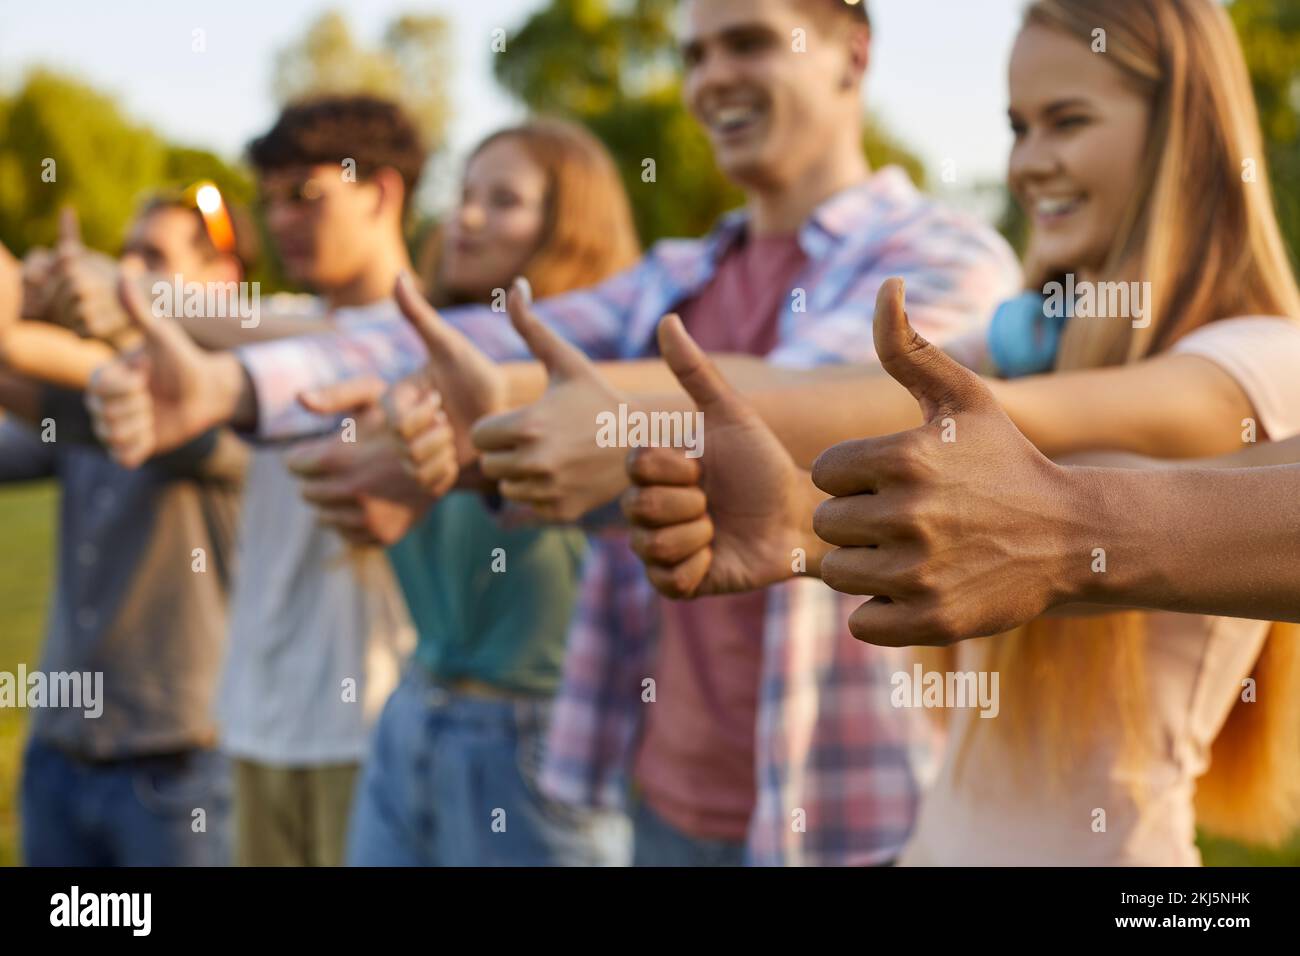 Diverse group of happy men and women doing thumbs up gestures at summer festival Stock Photo